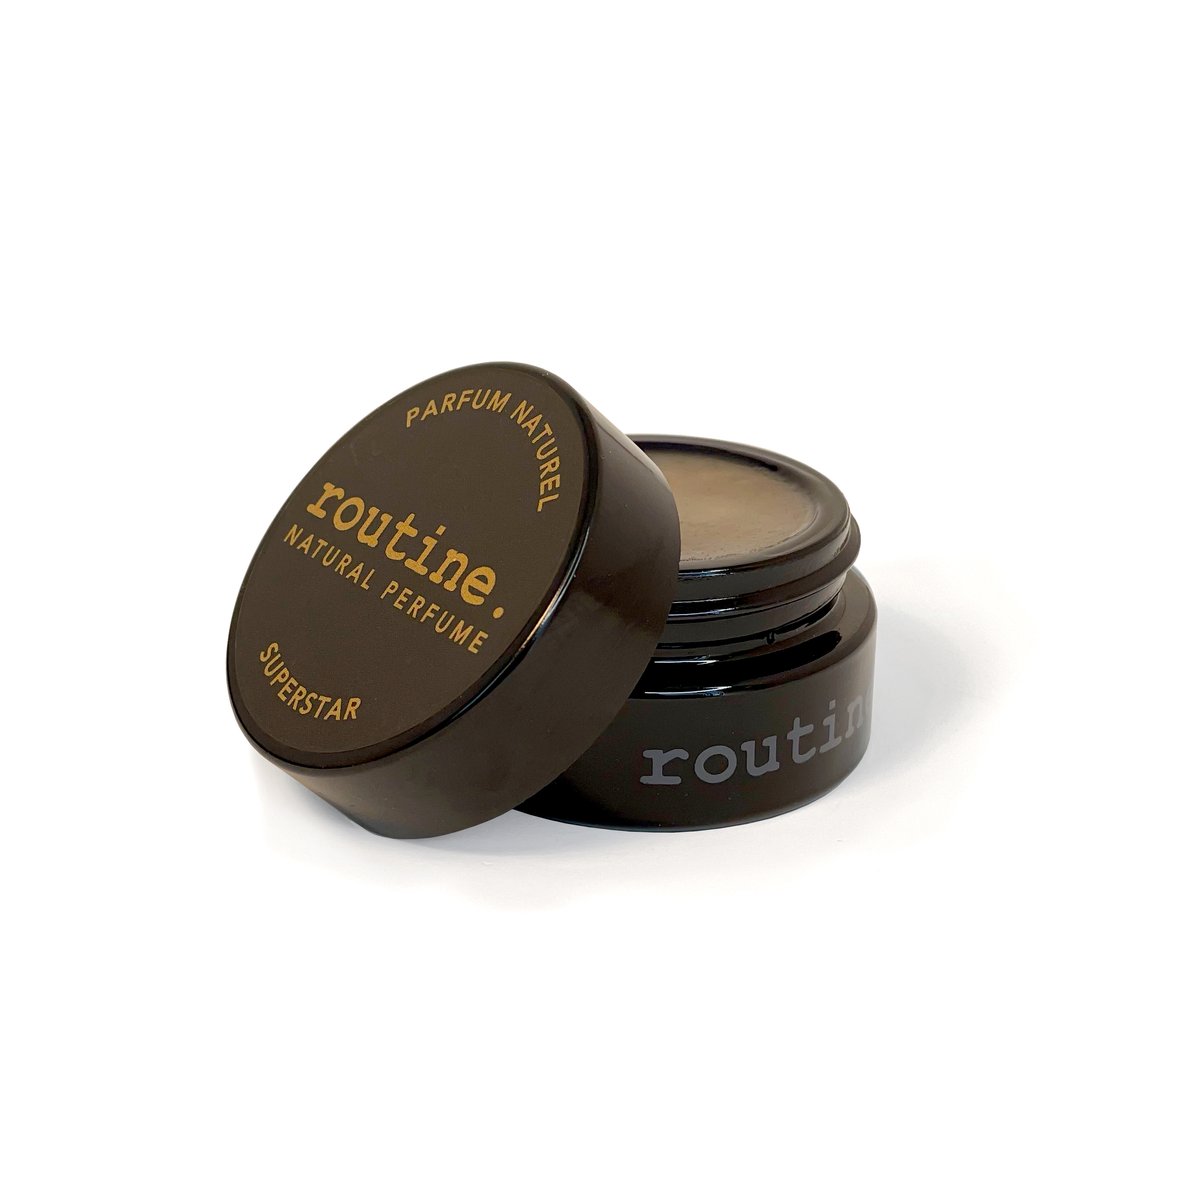 SUPERSTAR SOLID PERFUME - 15G